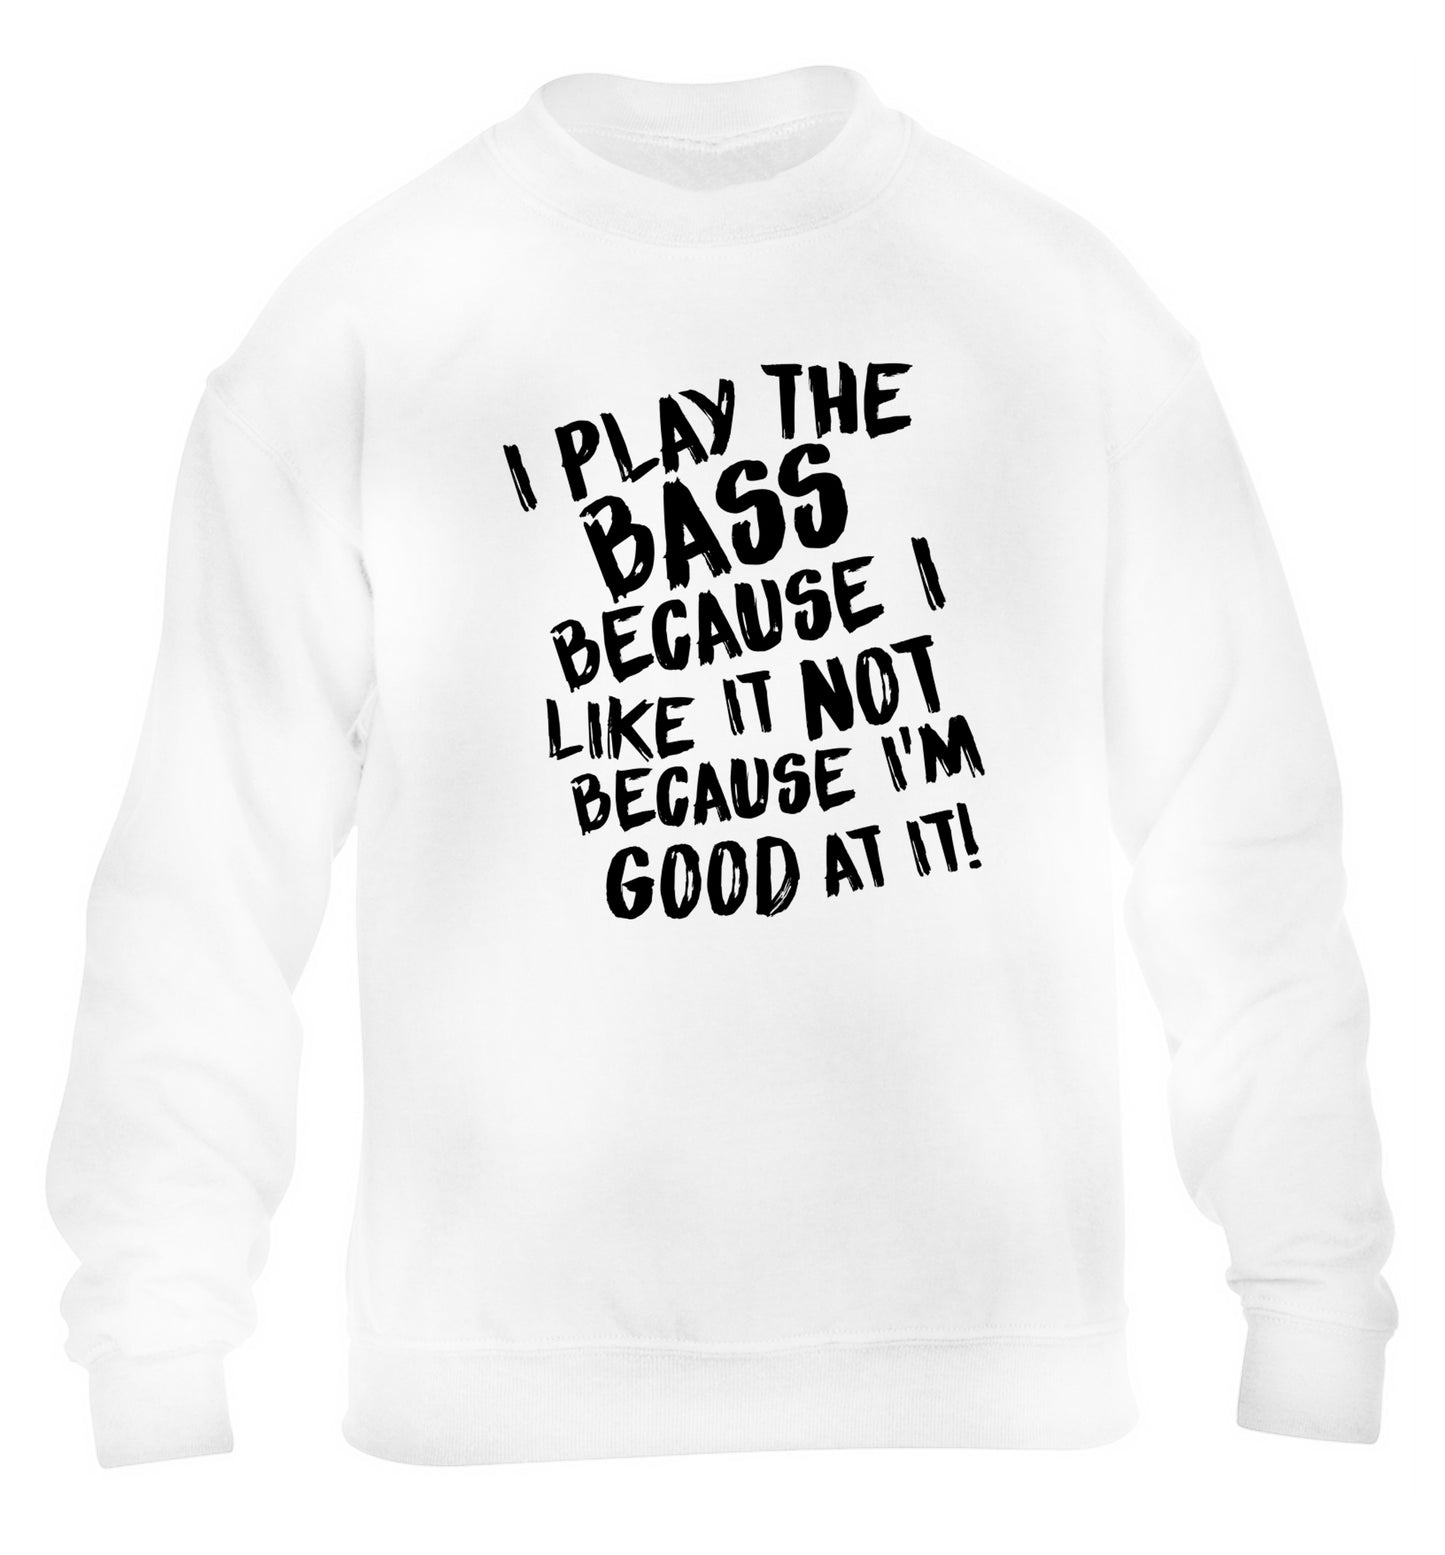 I play the bass because I like it not because I'm good at it children's white sweater 12-14 Years